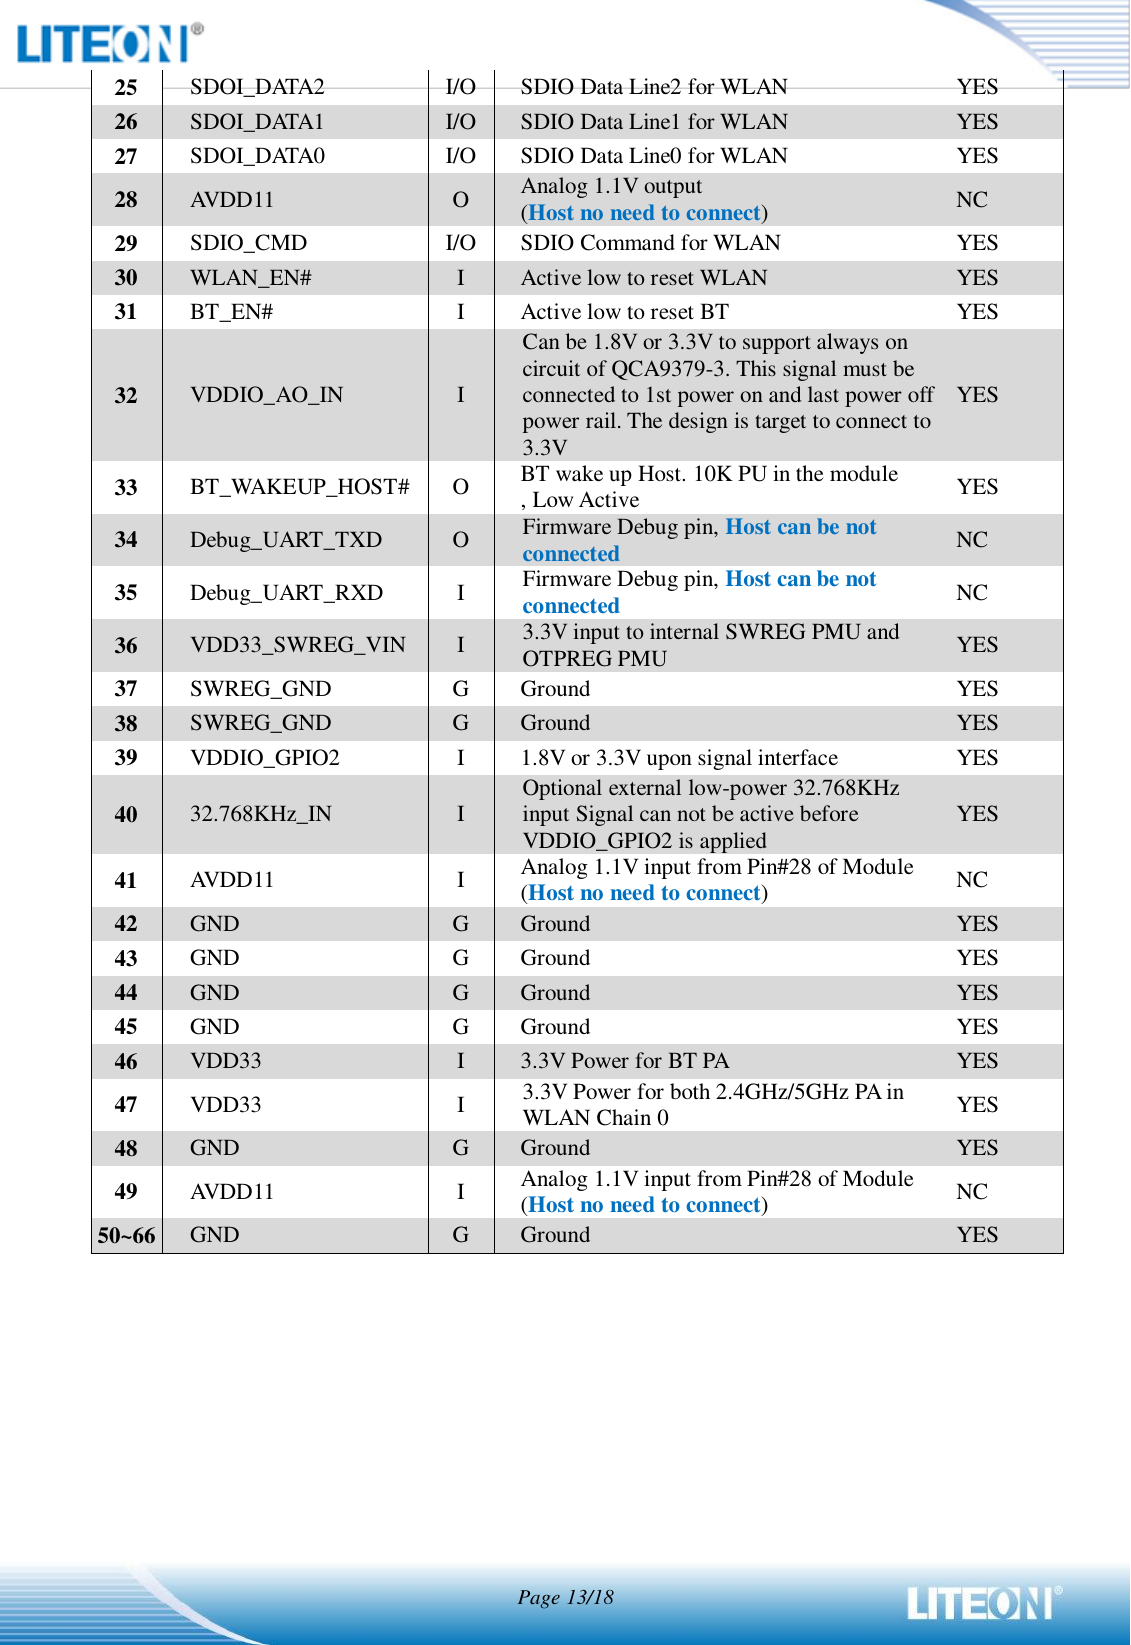  Page 13/18  25 SDOI_DATA2 I/O SDIO Data Line2 for WLAN YES 26 SDOI_DATA1 I/O SDIO Data Line1 for WLAN YES 27 SDOI_DATA0 I/O SDIO Data Line0 for WLAN YES 28 AVDD11 O Analog 1.1V output (Host no need to connect) NC 29 SDIO_CMD I/O SDIO Command for WLAN YES 30 WLAN_EN# I Active low to reset WLAN YES 31 BT_EN# I Active low to reset BT YES 32 VDDIO_AO_IN I Can be 1.8V or 3.3V to support always on circuit of QCA9379-3. This signal must be connected to 1st power on and last power off power rail. The design is target to connect to 3.3V YES 33 BT_WAKEUP_HOST# O BT wake up Host. 10K PU in the module , Low Active YES 34 Debug_UART_TXD O Firmware Debug pin, Host can be not connected NC 35 Debug_UART_RXD I Firmware Debug pin, Host can be not connected NC 36 VDD33_SWREG_VIN I 3.3V input to internal SWREG PMU and OTPREG PMU YES 37 SWREG_GND G Ground YES 38 SWREG_GND G Ground YES 39 VDDIO_GPIO2 I 1.8V or 3.3V upon signal interface YES 40 32.768KHz_IN I Optional external low-power 32.768KHz input Signal can not be active before VDDIO_GPIO2 is applied YES 41 AVDD11 I Analog 1.1V input from Pin#28 of Module (Host no need to connect) NC 42 GND G Ground YES 43 GND G Ground YES 44 GND G Ground YES 45 GND G Ground YES 46 VDD33 I 3.3V Power for BT PA YES 47 VDD33 I 3.3V Power for both 2.4GHz/5GHz PA in WLAN Chain 0 YES 48 GND G Ground YES 49 AVDD11 I Analog 1.1V input from Pin#28 of Module (Host no need to connect) NC 50~66 GND G Ground YES    